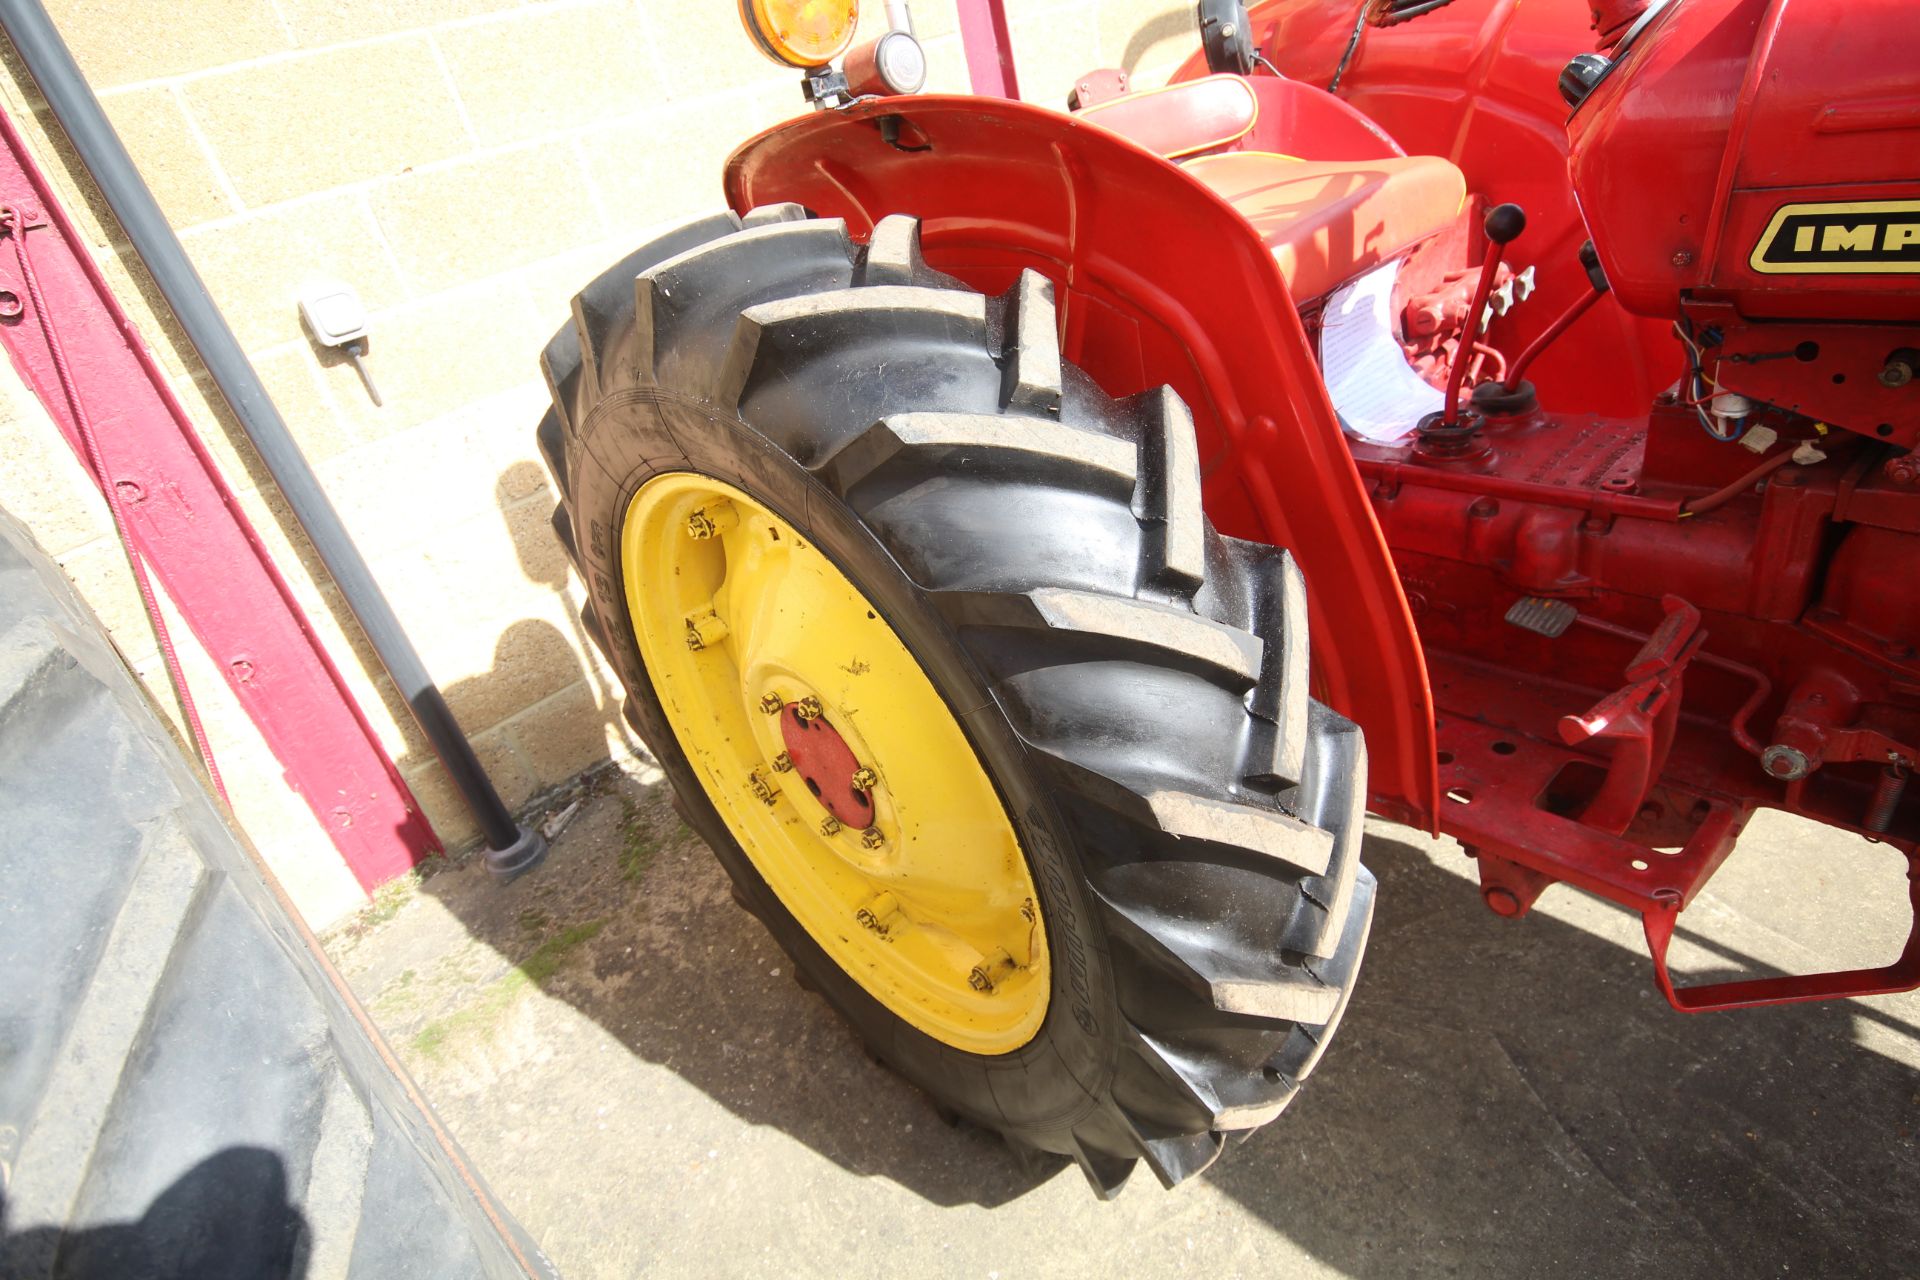 David Brown 990 Implematic live drive 2WD tractor. Registration CNO 117B. Date of first registration - Image 31 of 43